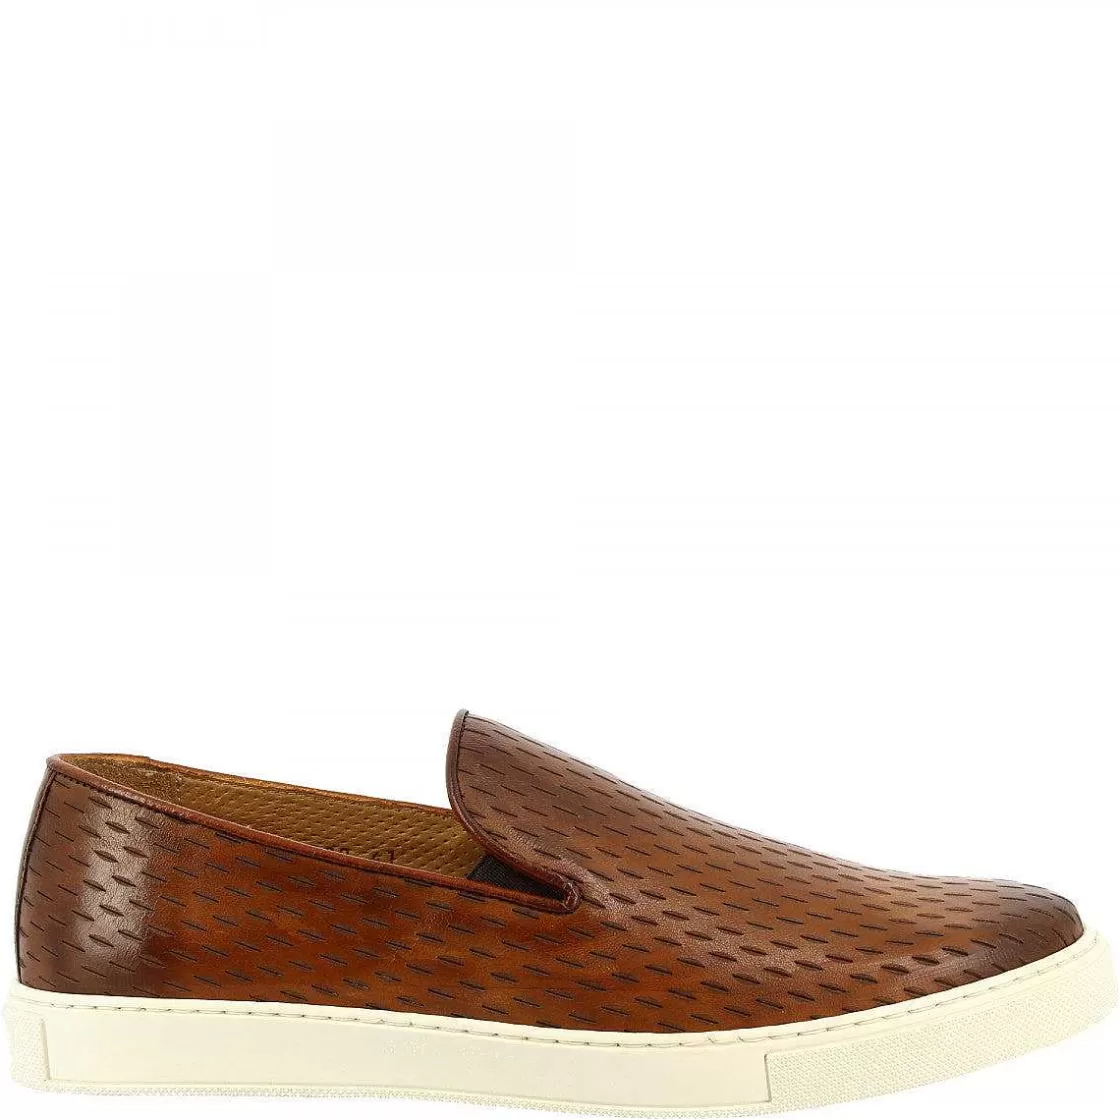 Leonardo Men'S Handmade Slip-On Laceless Sneakers In Brown Perforated Calf Leather Discount